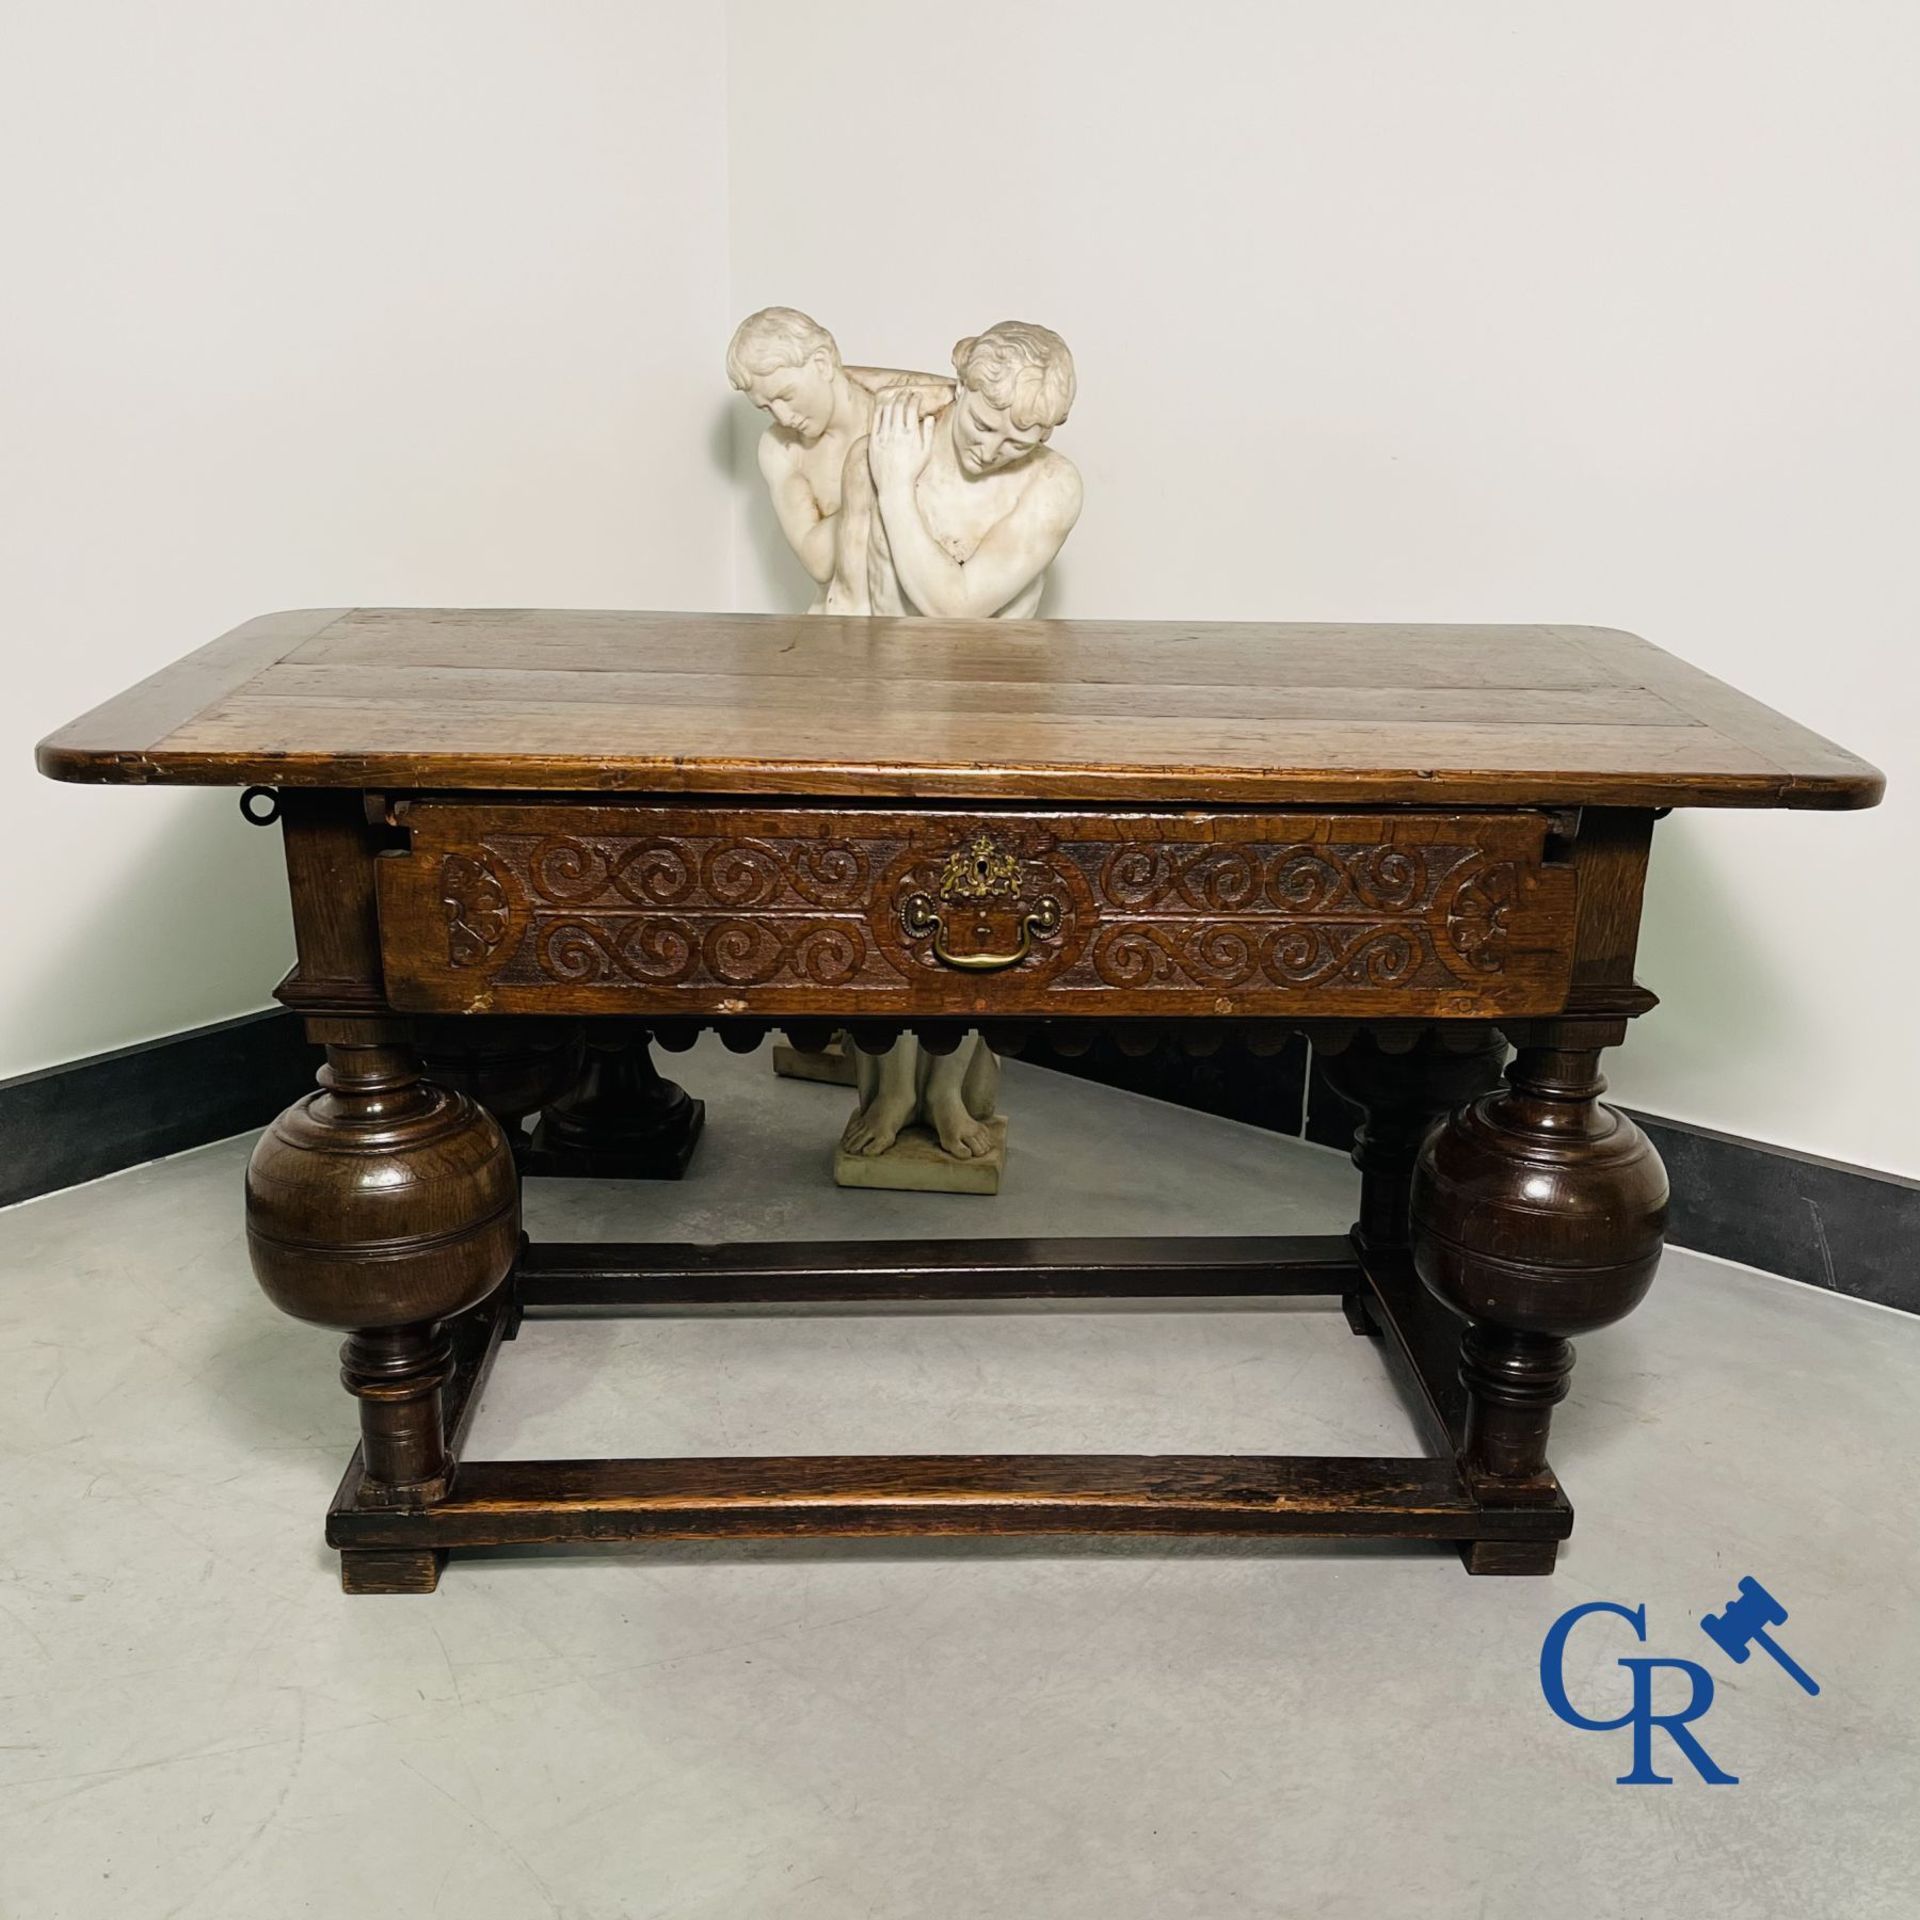 Furniture: An oak table with drawer. 17th - 18th century. - Bild 3 aus 16